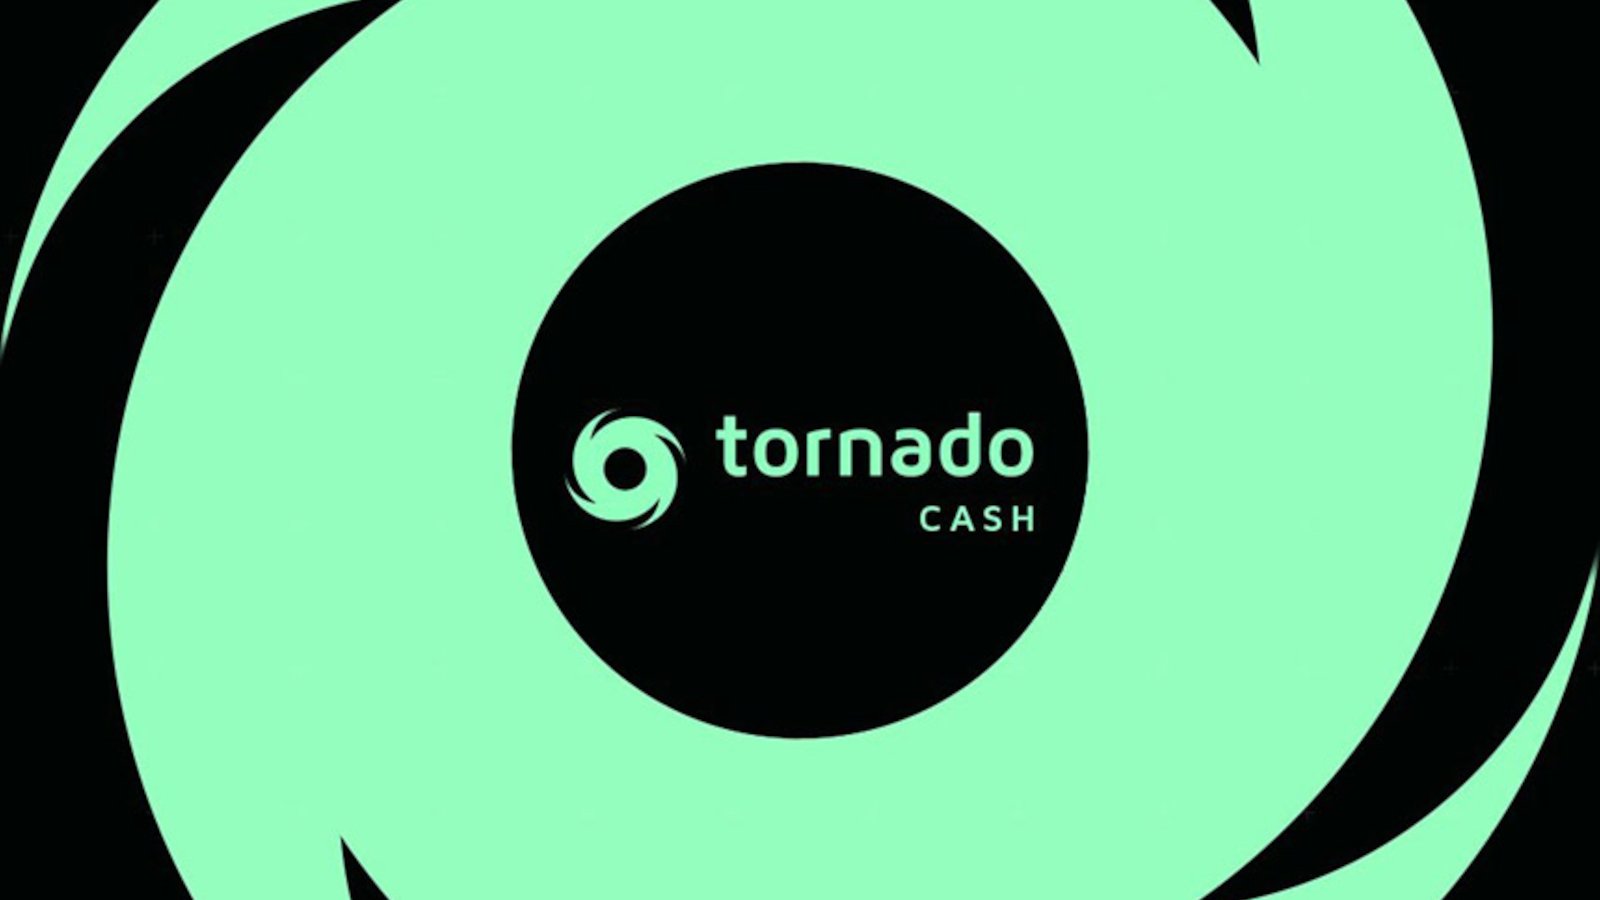 Malicious code in Tornado Cash governance proposal puts user funds at risk